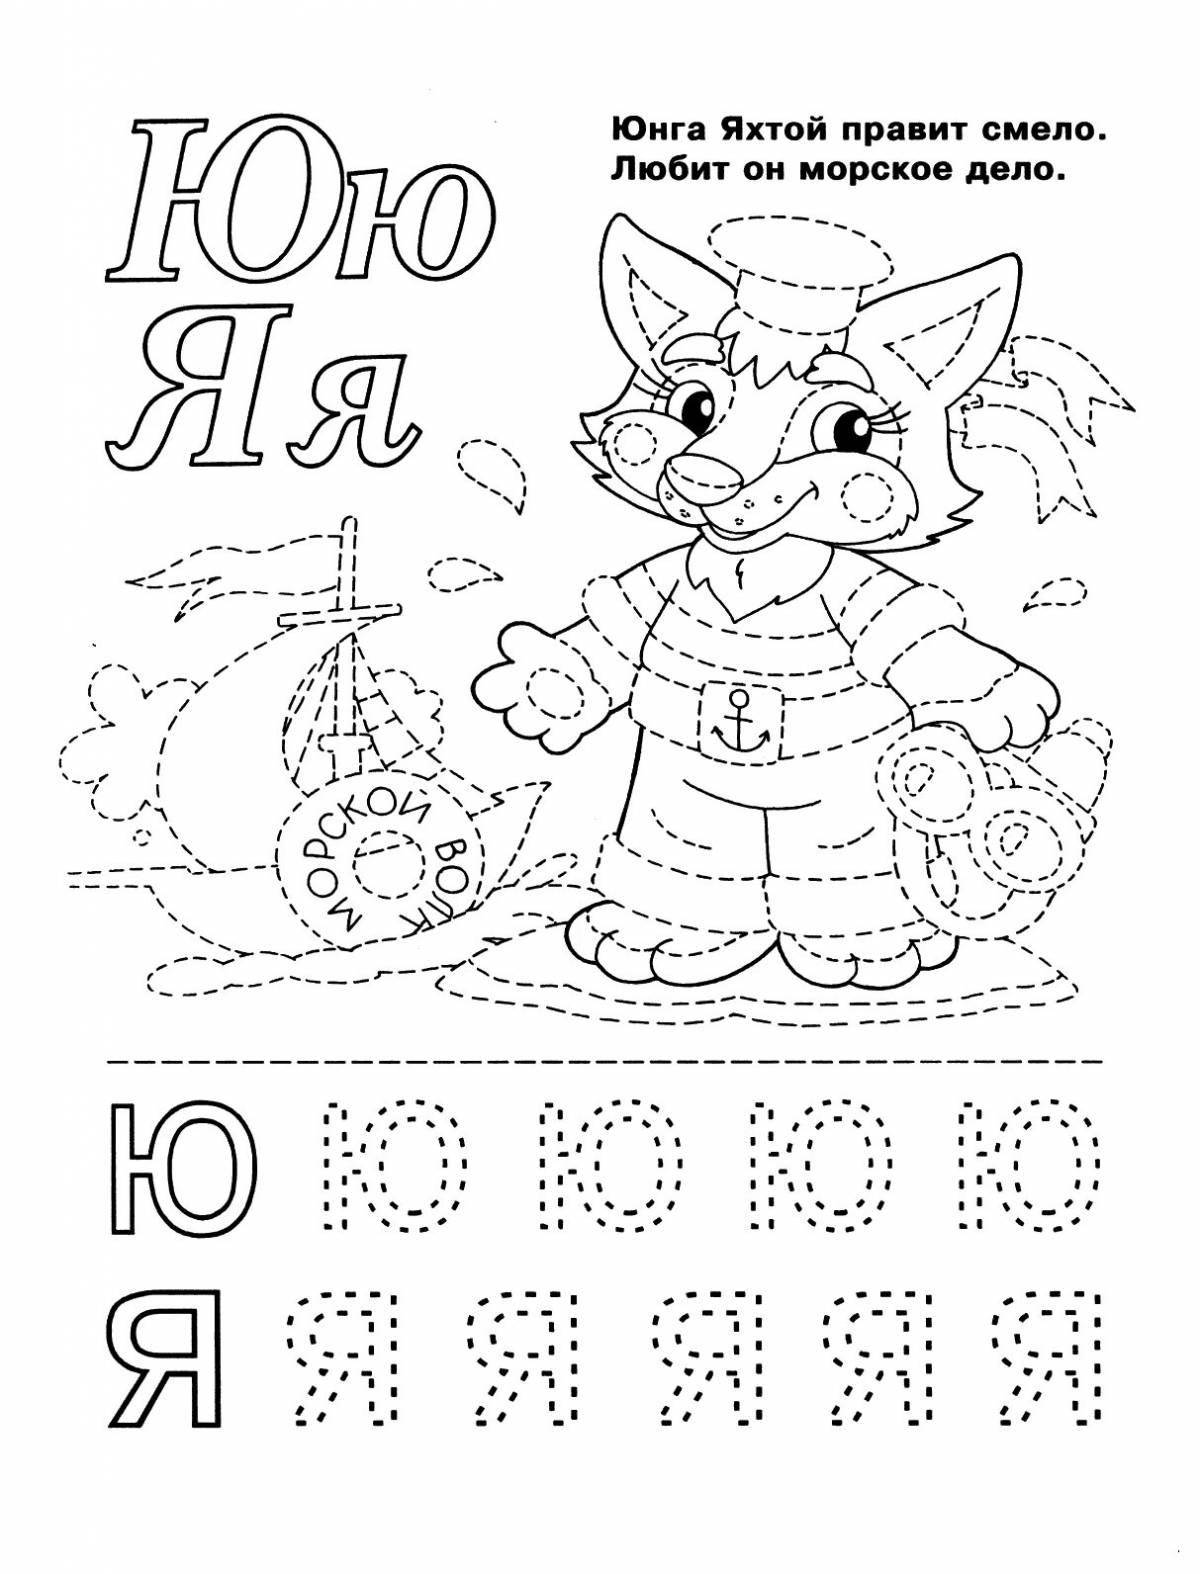 Alphabet fun coloring book for 5-6 year olds